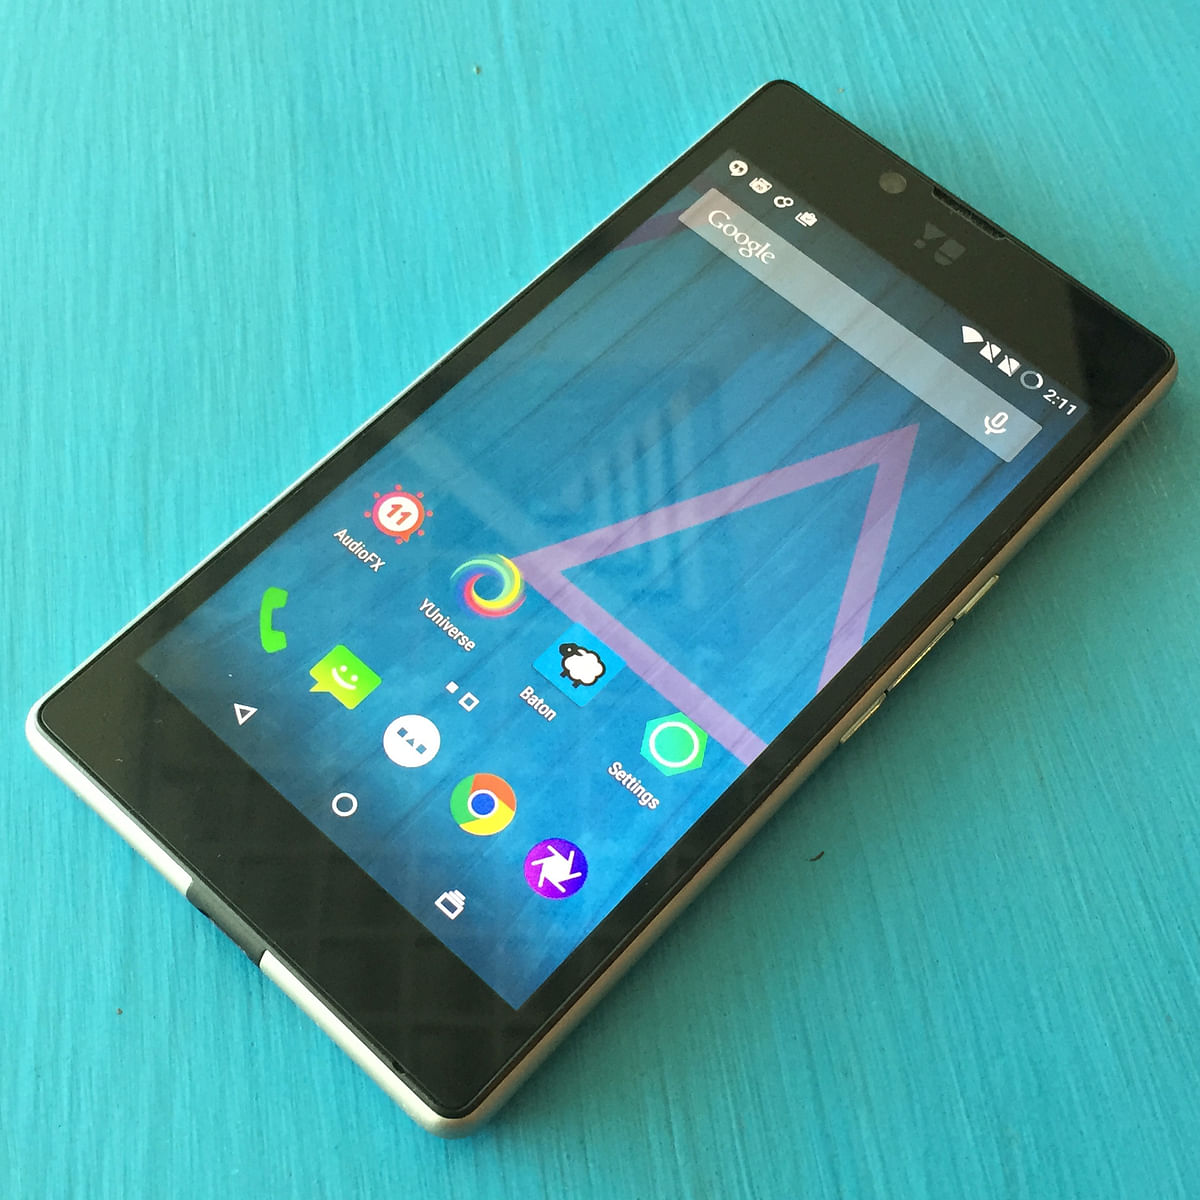 Review: #YuYuphoria by Micromax promises a lot for a smartphone priced at Rs 6,999